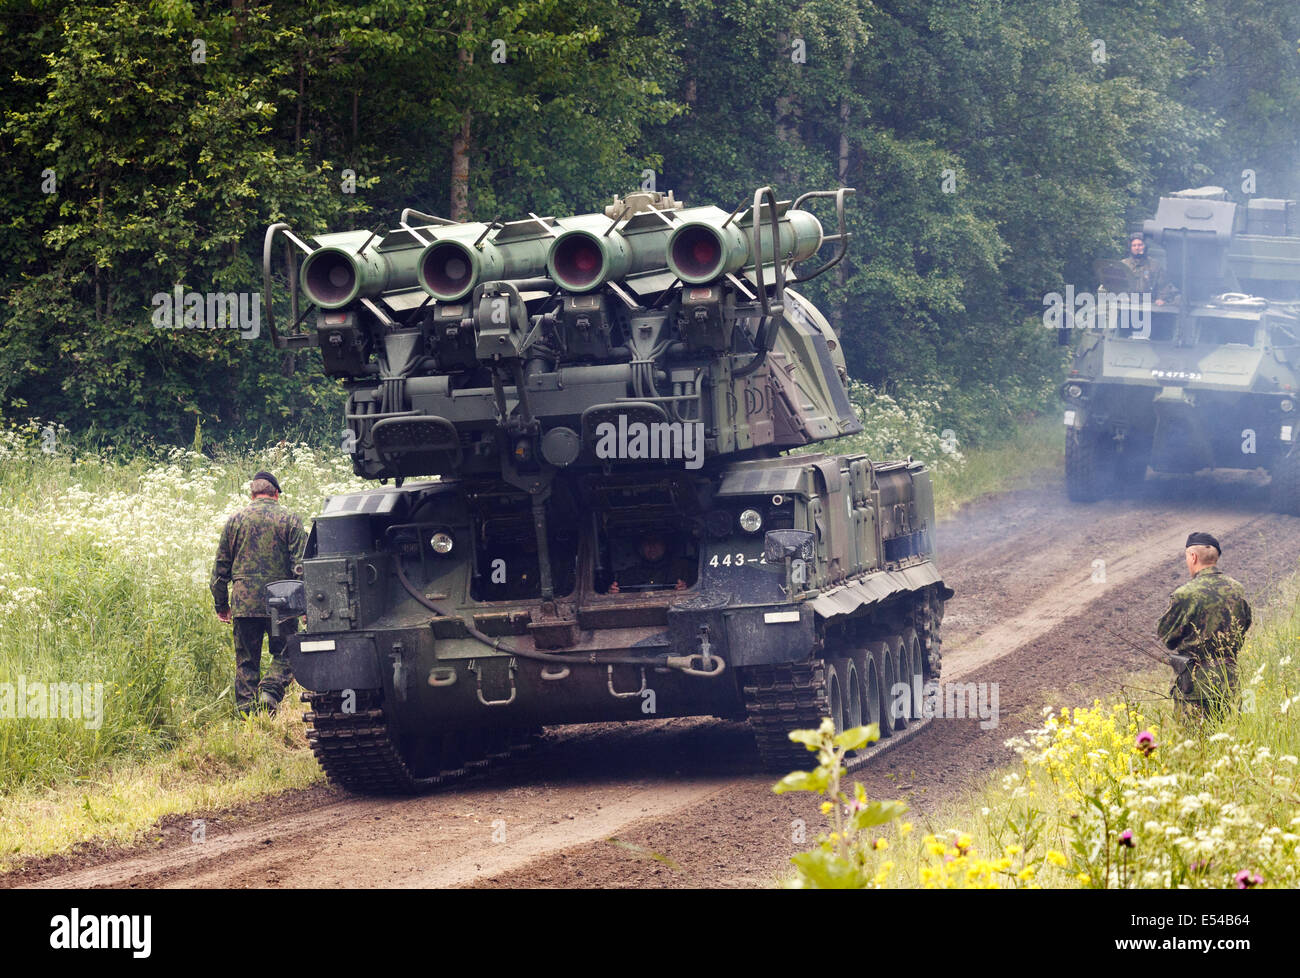 Platform vehicle of the surface-to-air missile system Buk-M1 with its  quadruple launcher, here operated by the Finnish Army Stock Photo - Alamy